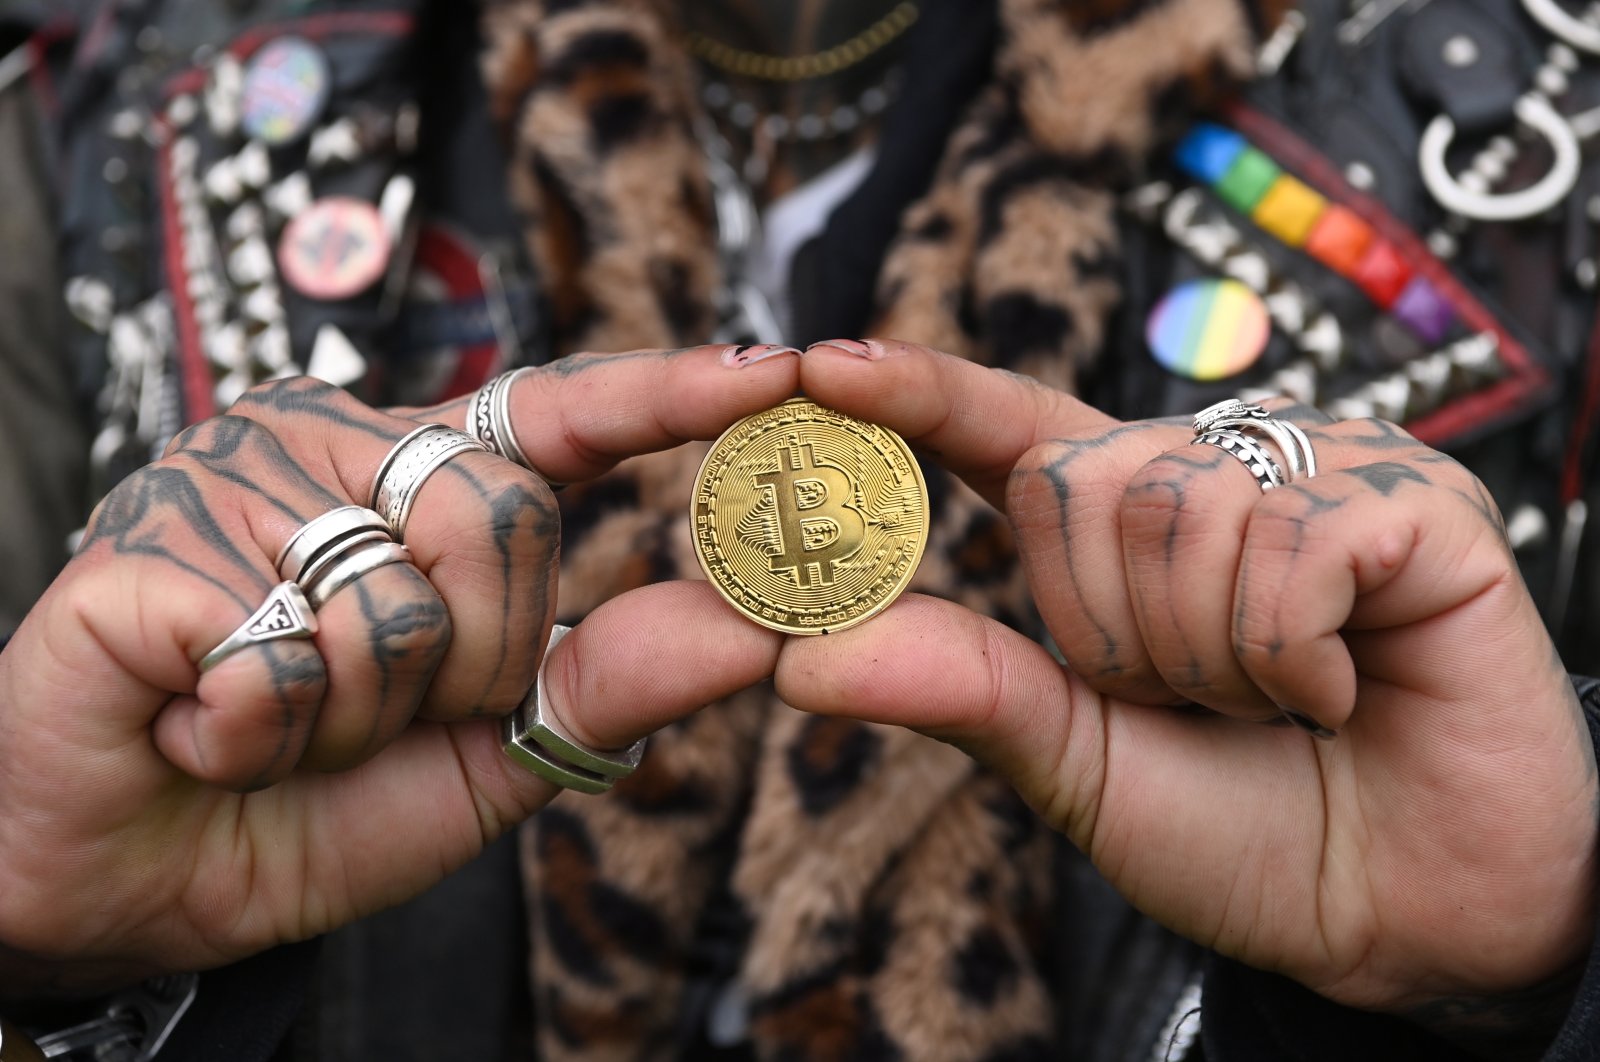 A performer holds a metal representation of a Bitcoin during a photocall in front of the Tower of London in London, Britain, Nov. 24, 2021. (EPA/FACUNDO ARRIZABALAGA)